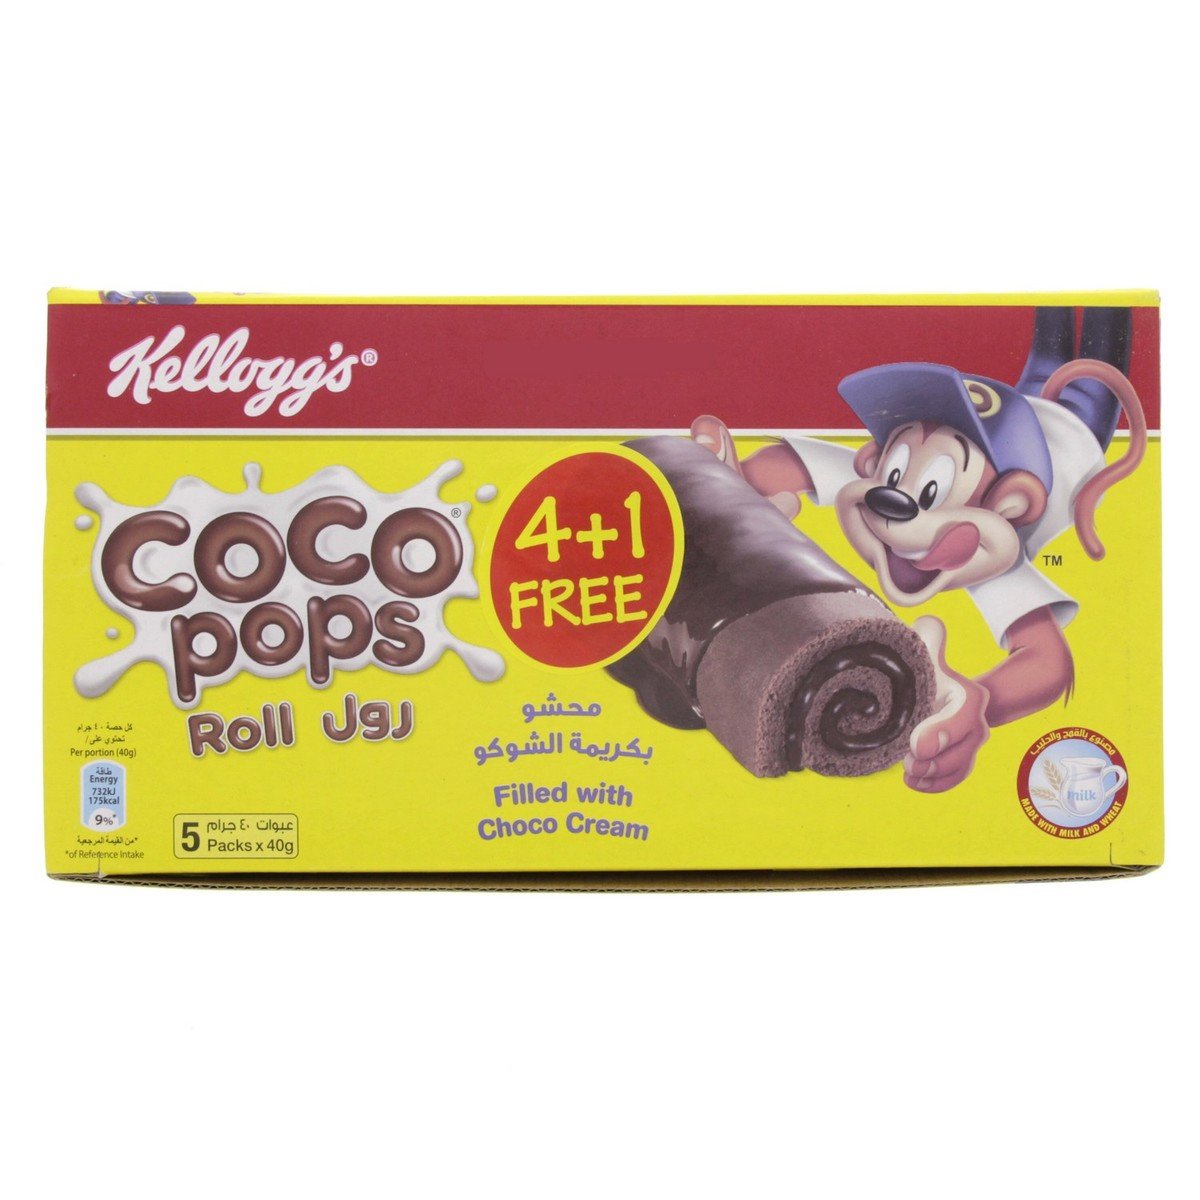 Kellogg's Coco Pops Roll Filled With Choco Cream 5 x 40 g